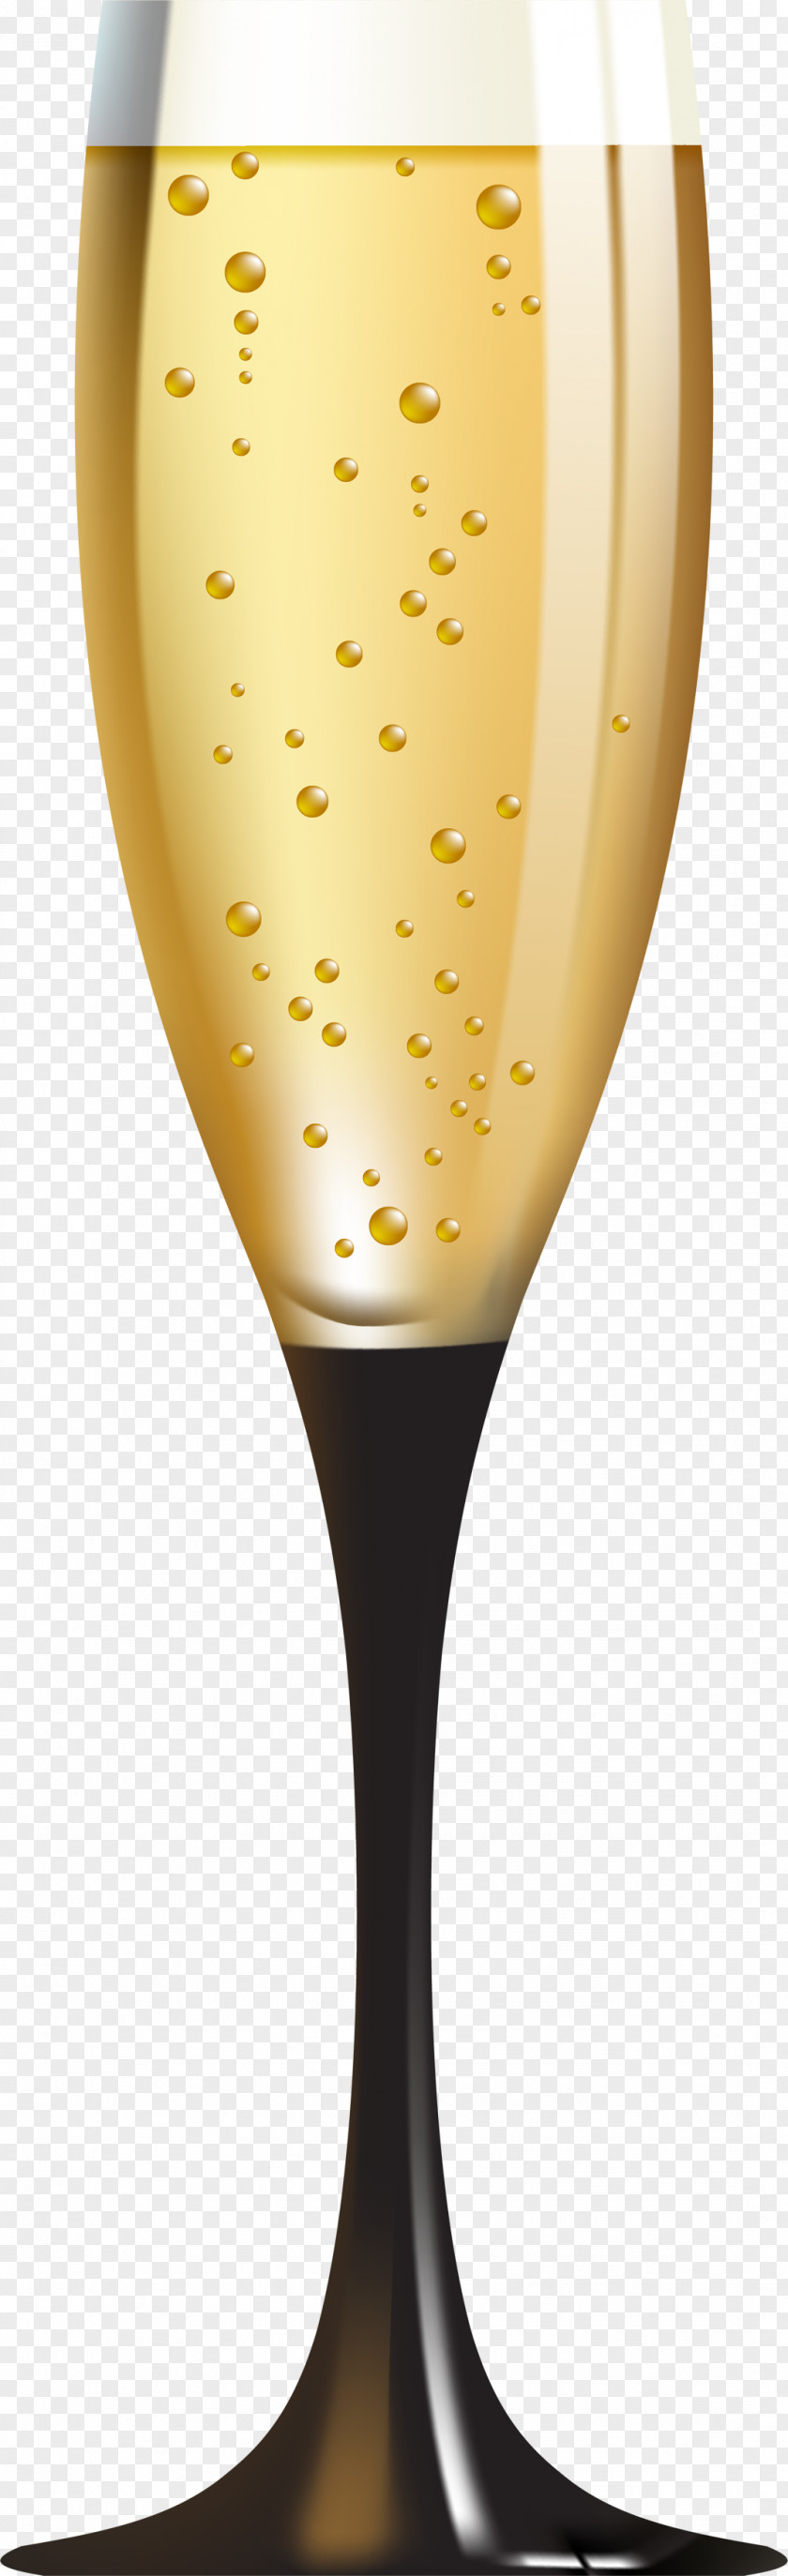 Champagne Glass White Wine Cocktail Clip Art PNG